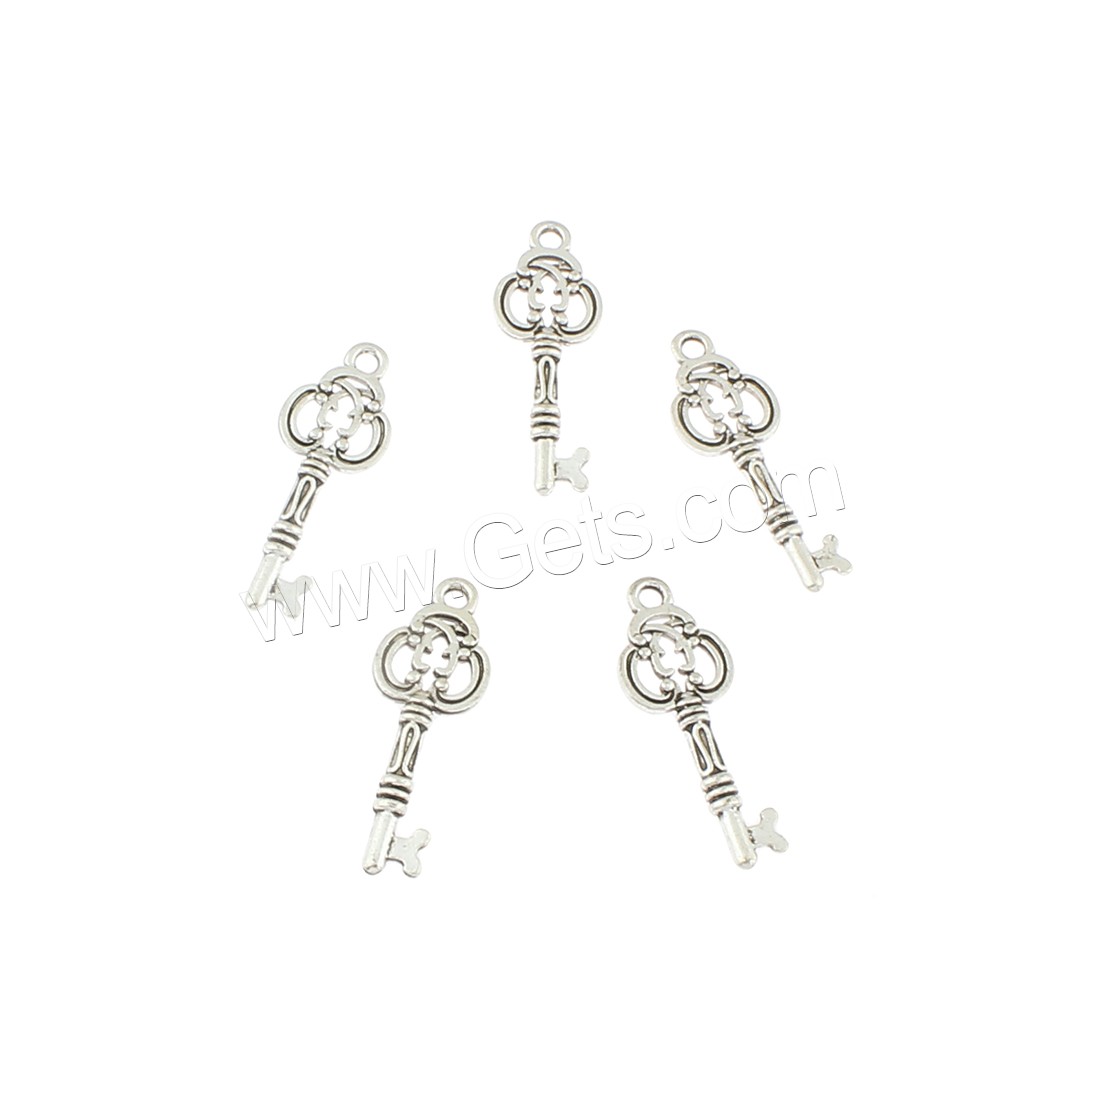 Zinc Alloy Jewelry Pendants, Key, antique silver color plated, 10x27x3mm, Hole:Approx 2mm, Approx 500PCs/Bag, Sold By Bag